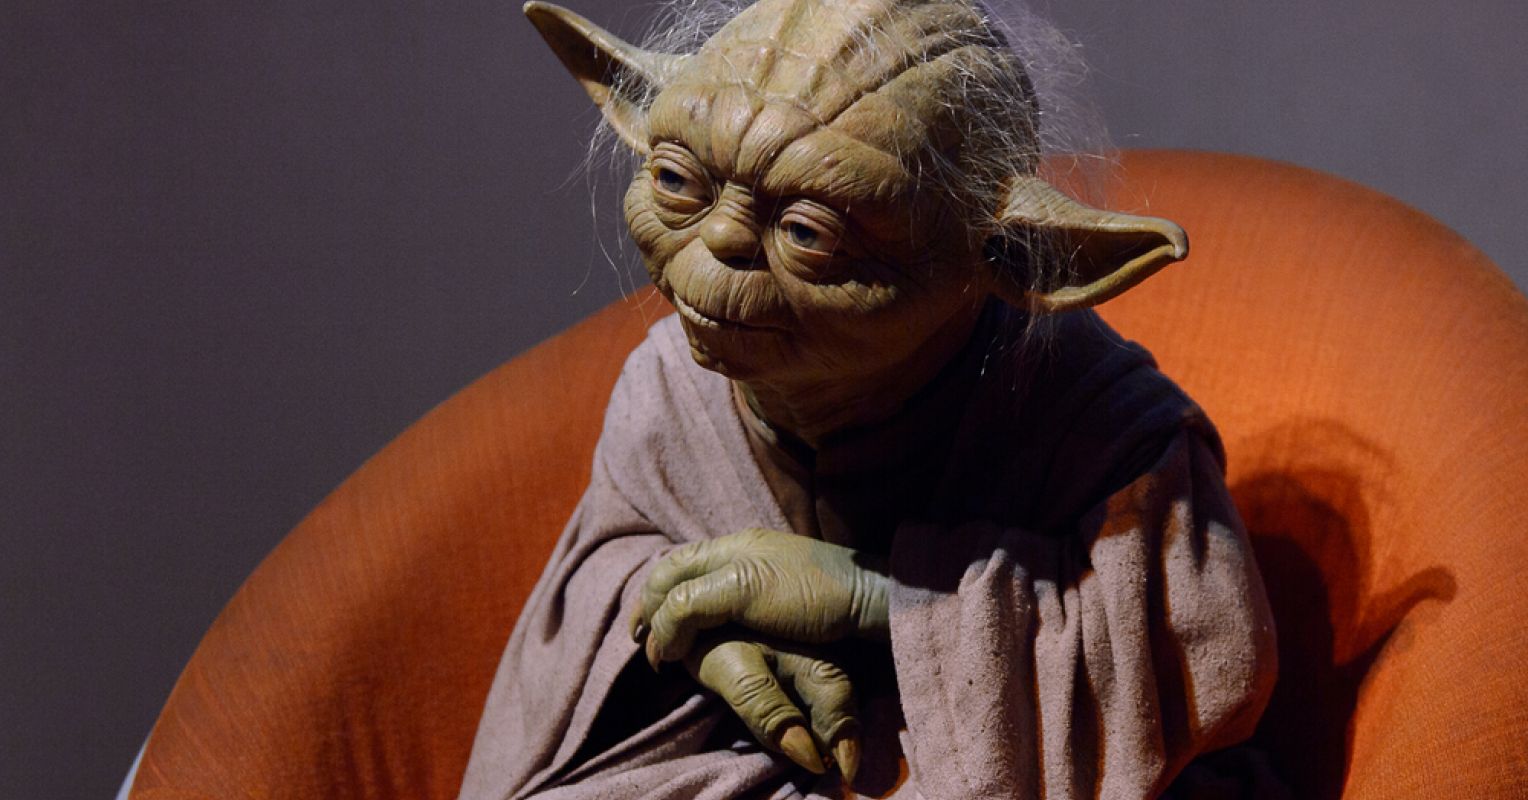 What Makes Baby Yoda So Lovable? – SAPIENS